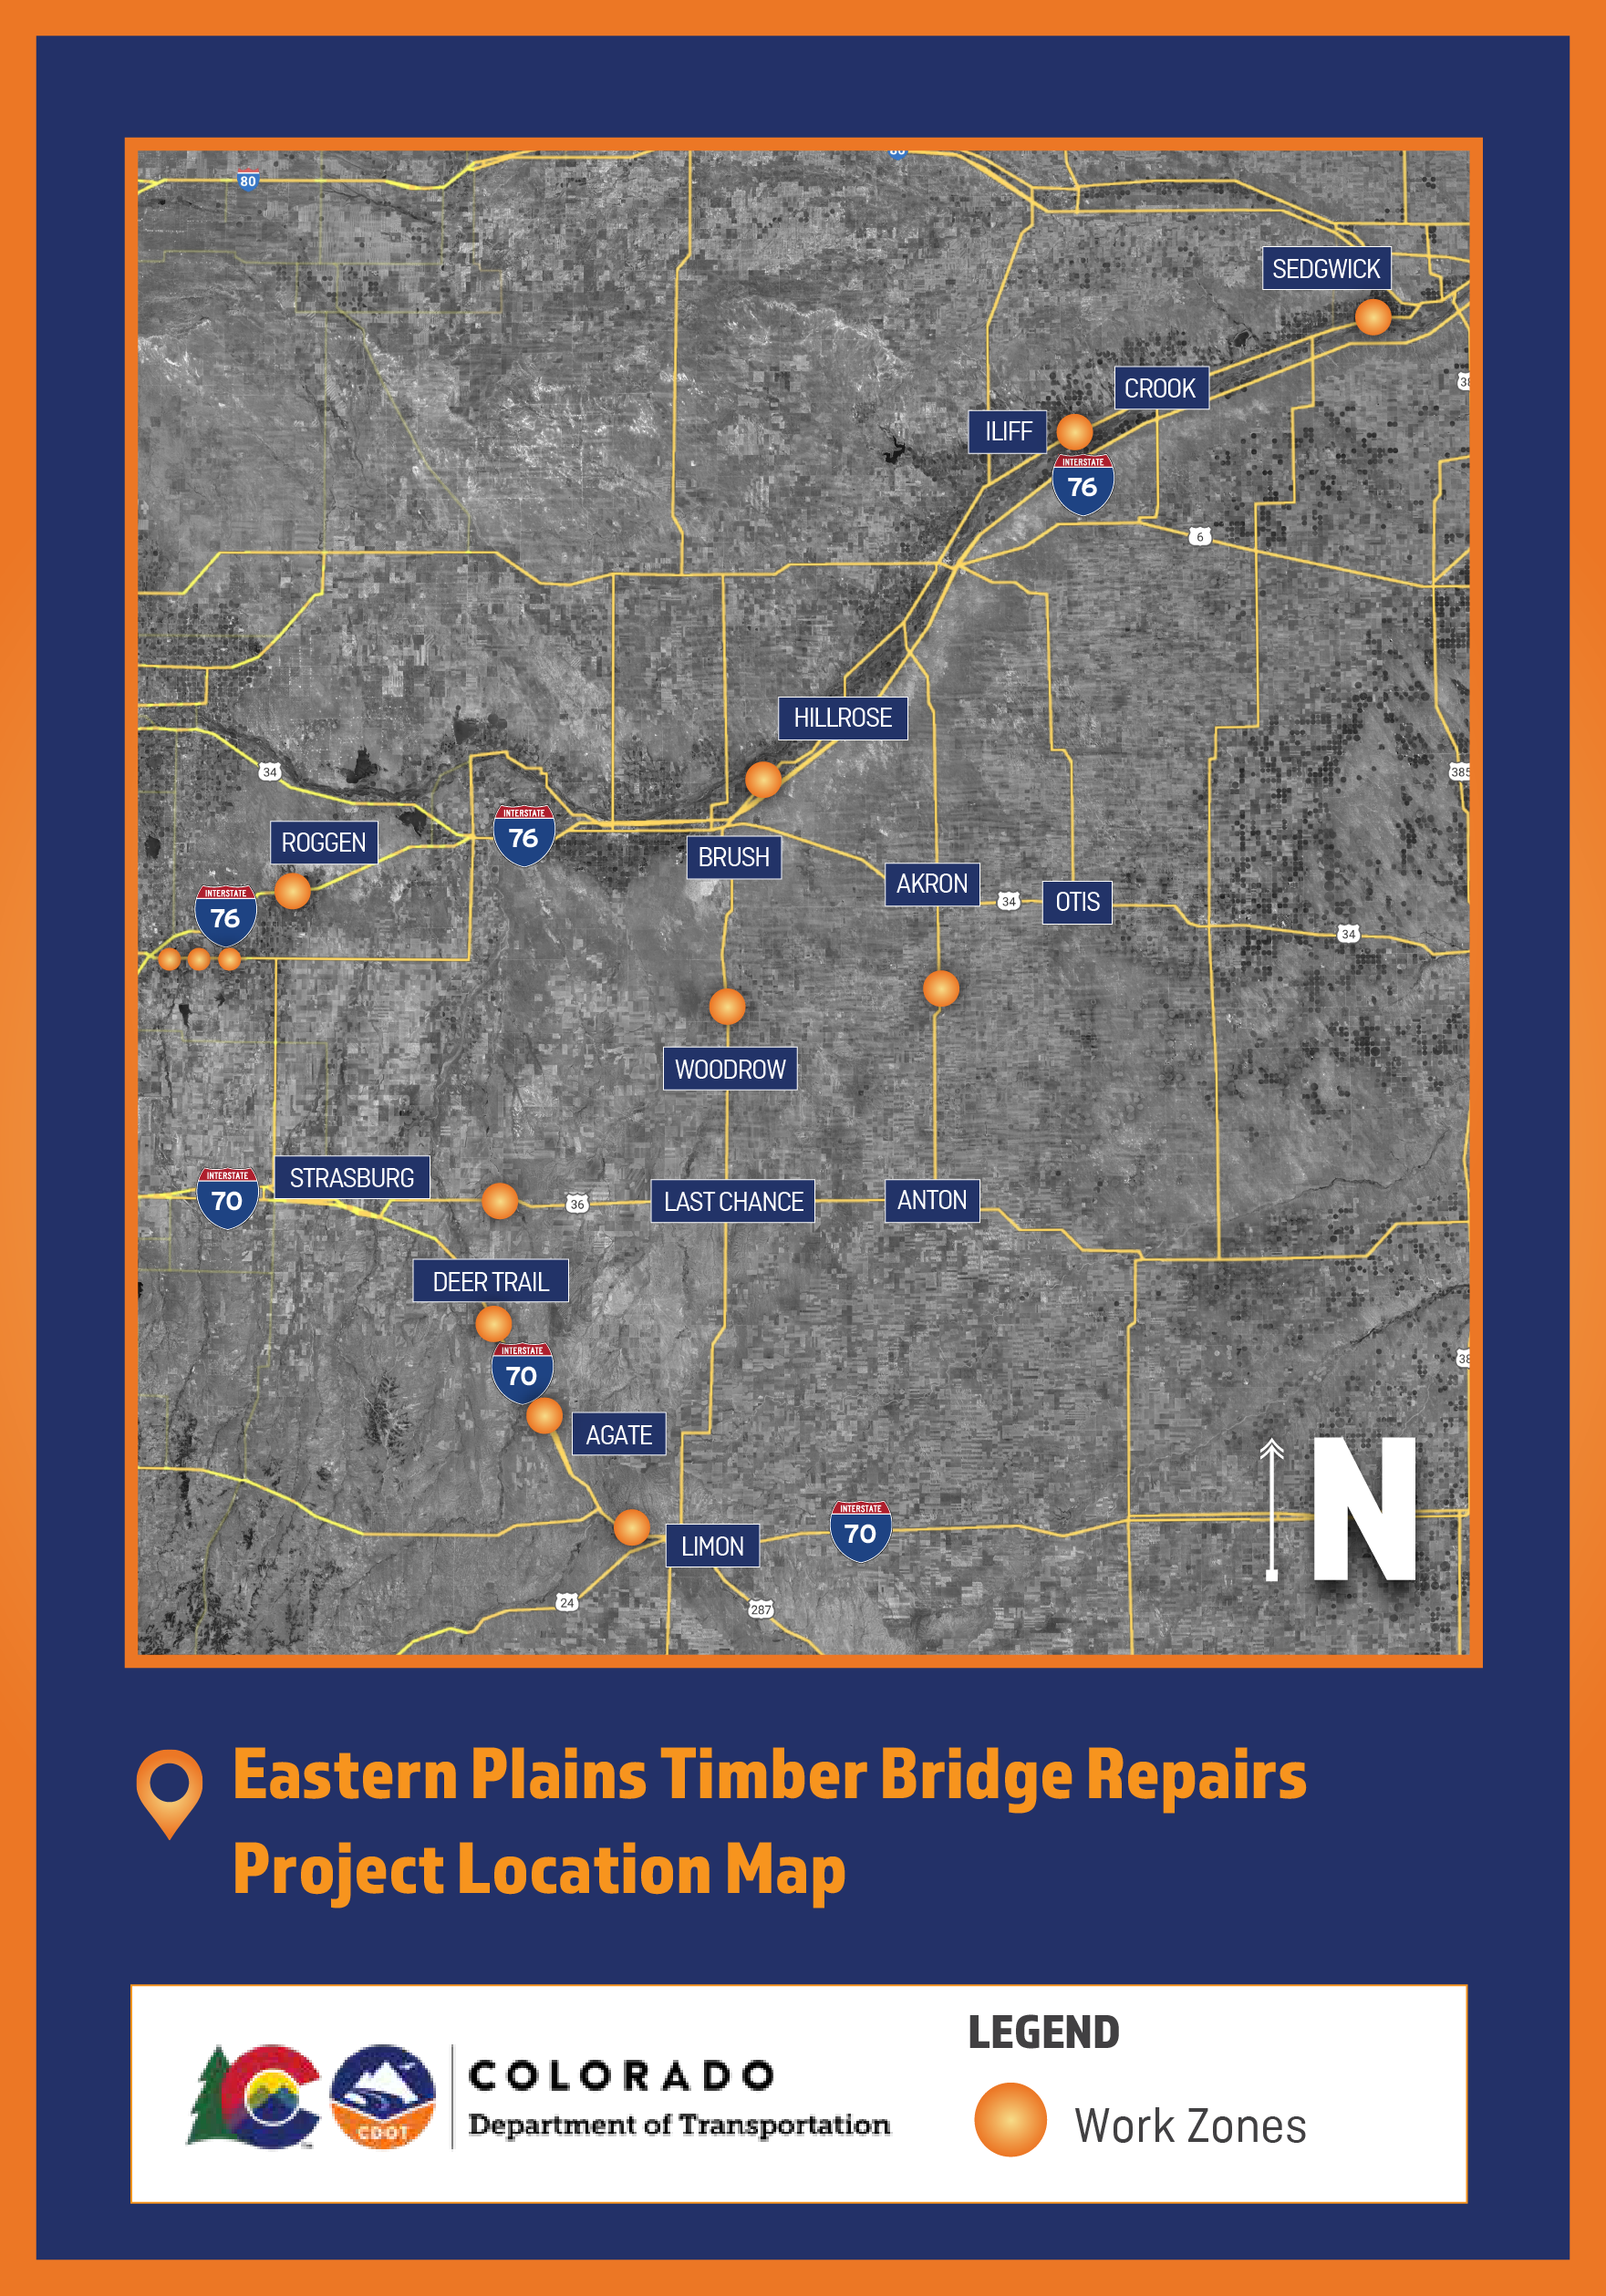 Map showing the various locations of the Eastern Plains Timber Bridge repairs in northeastern Colorado